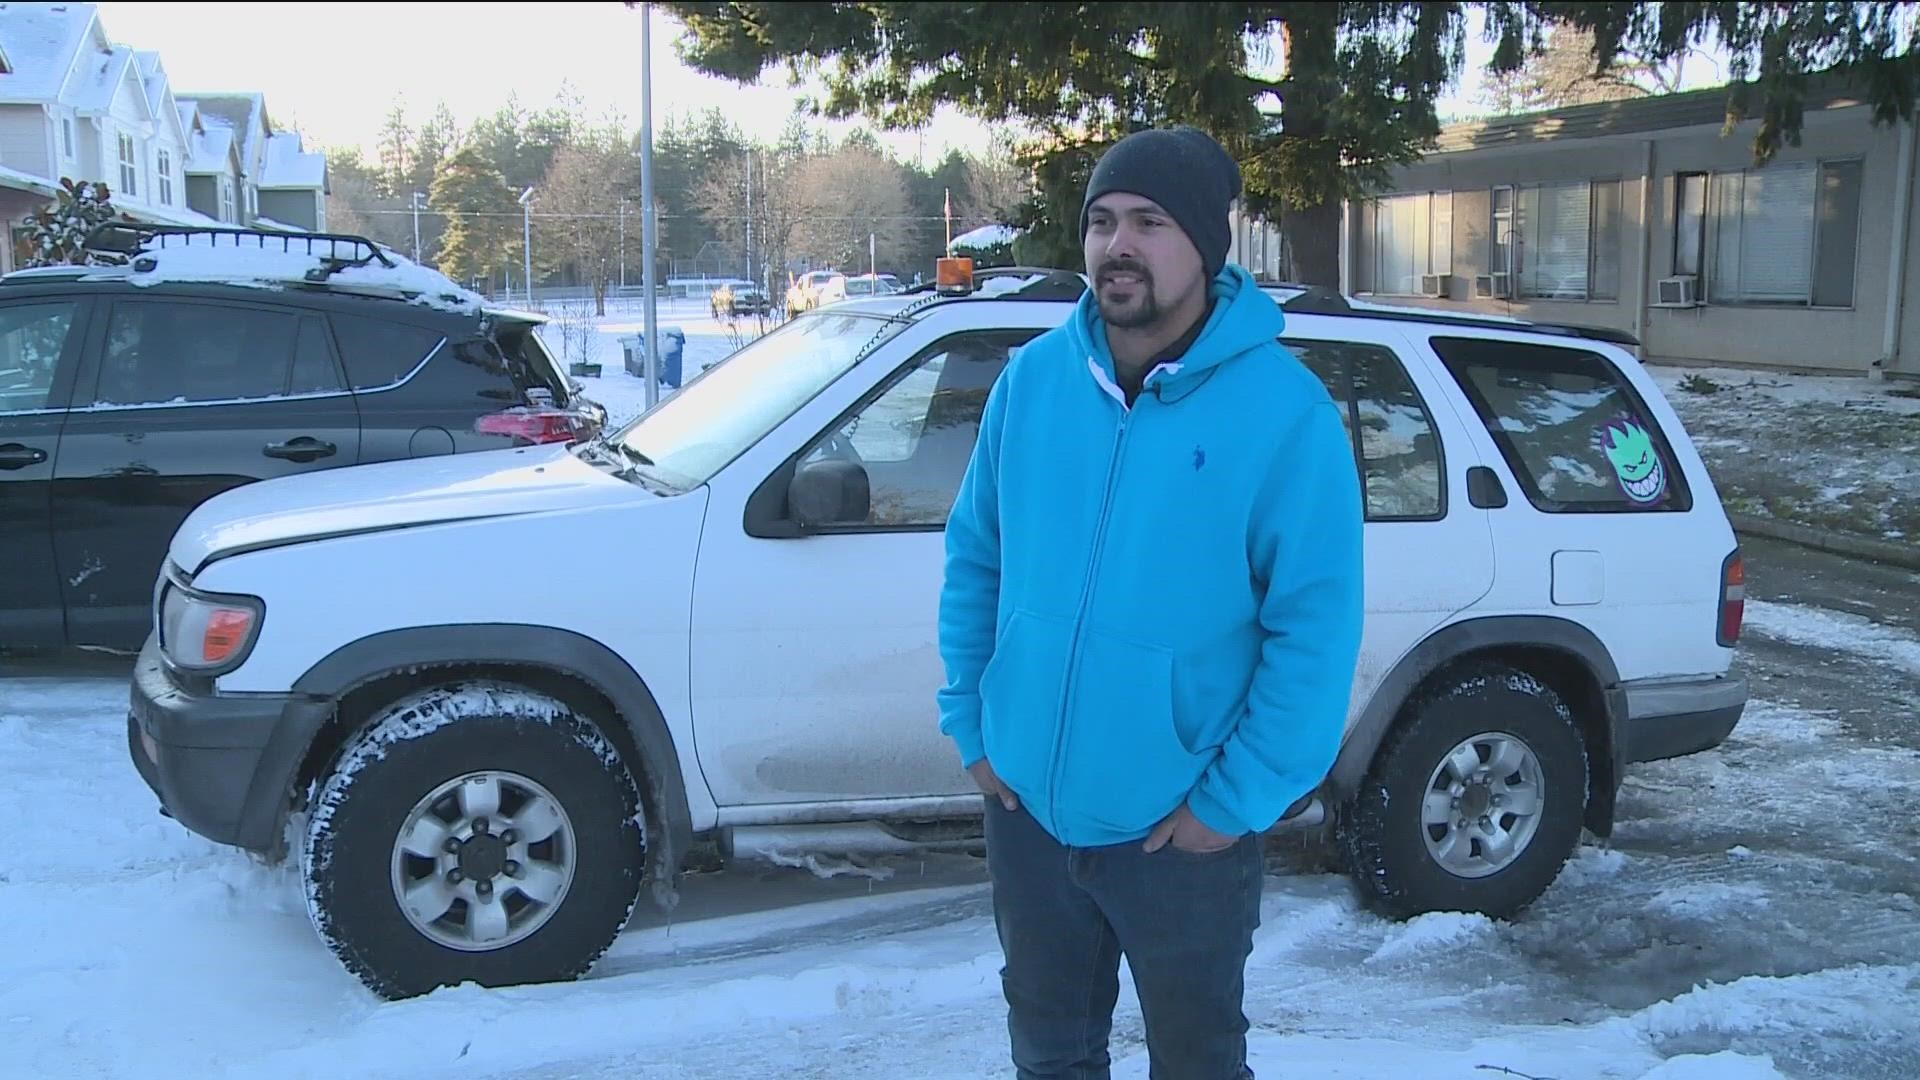 For seven hours, Jon Gilbert worked to free as many stranded drivers as he could. He stayed there until 6 a.m. "Everyone was so thankful," he said.